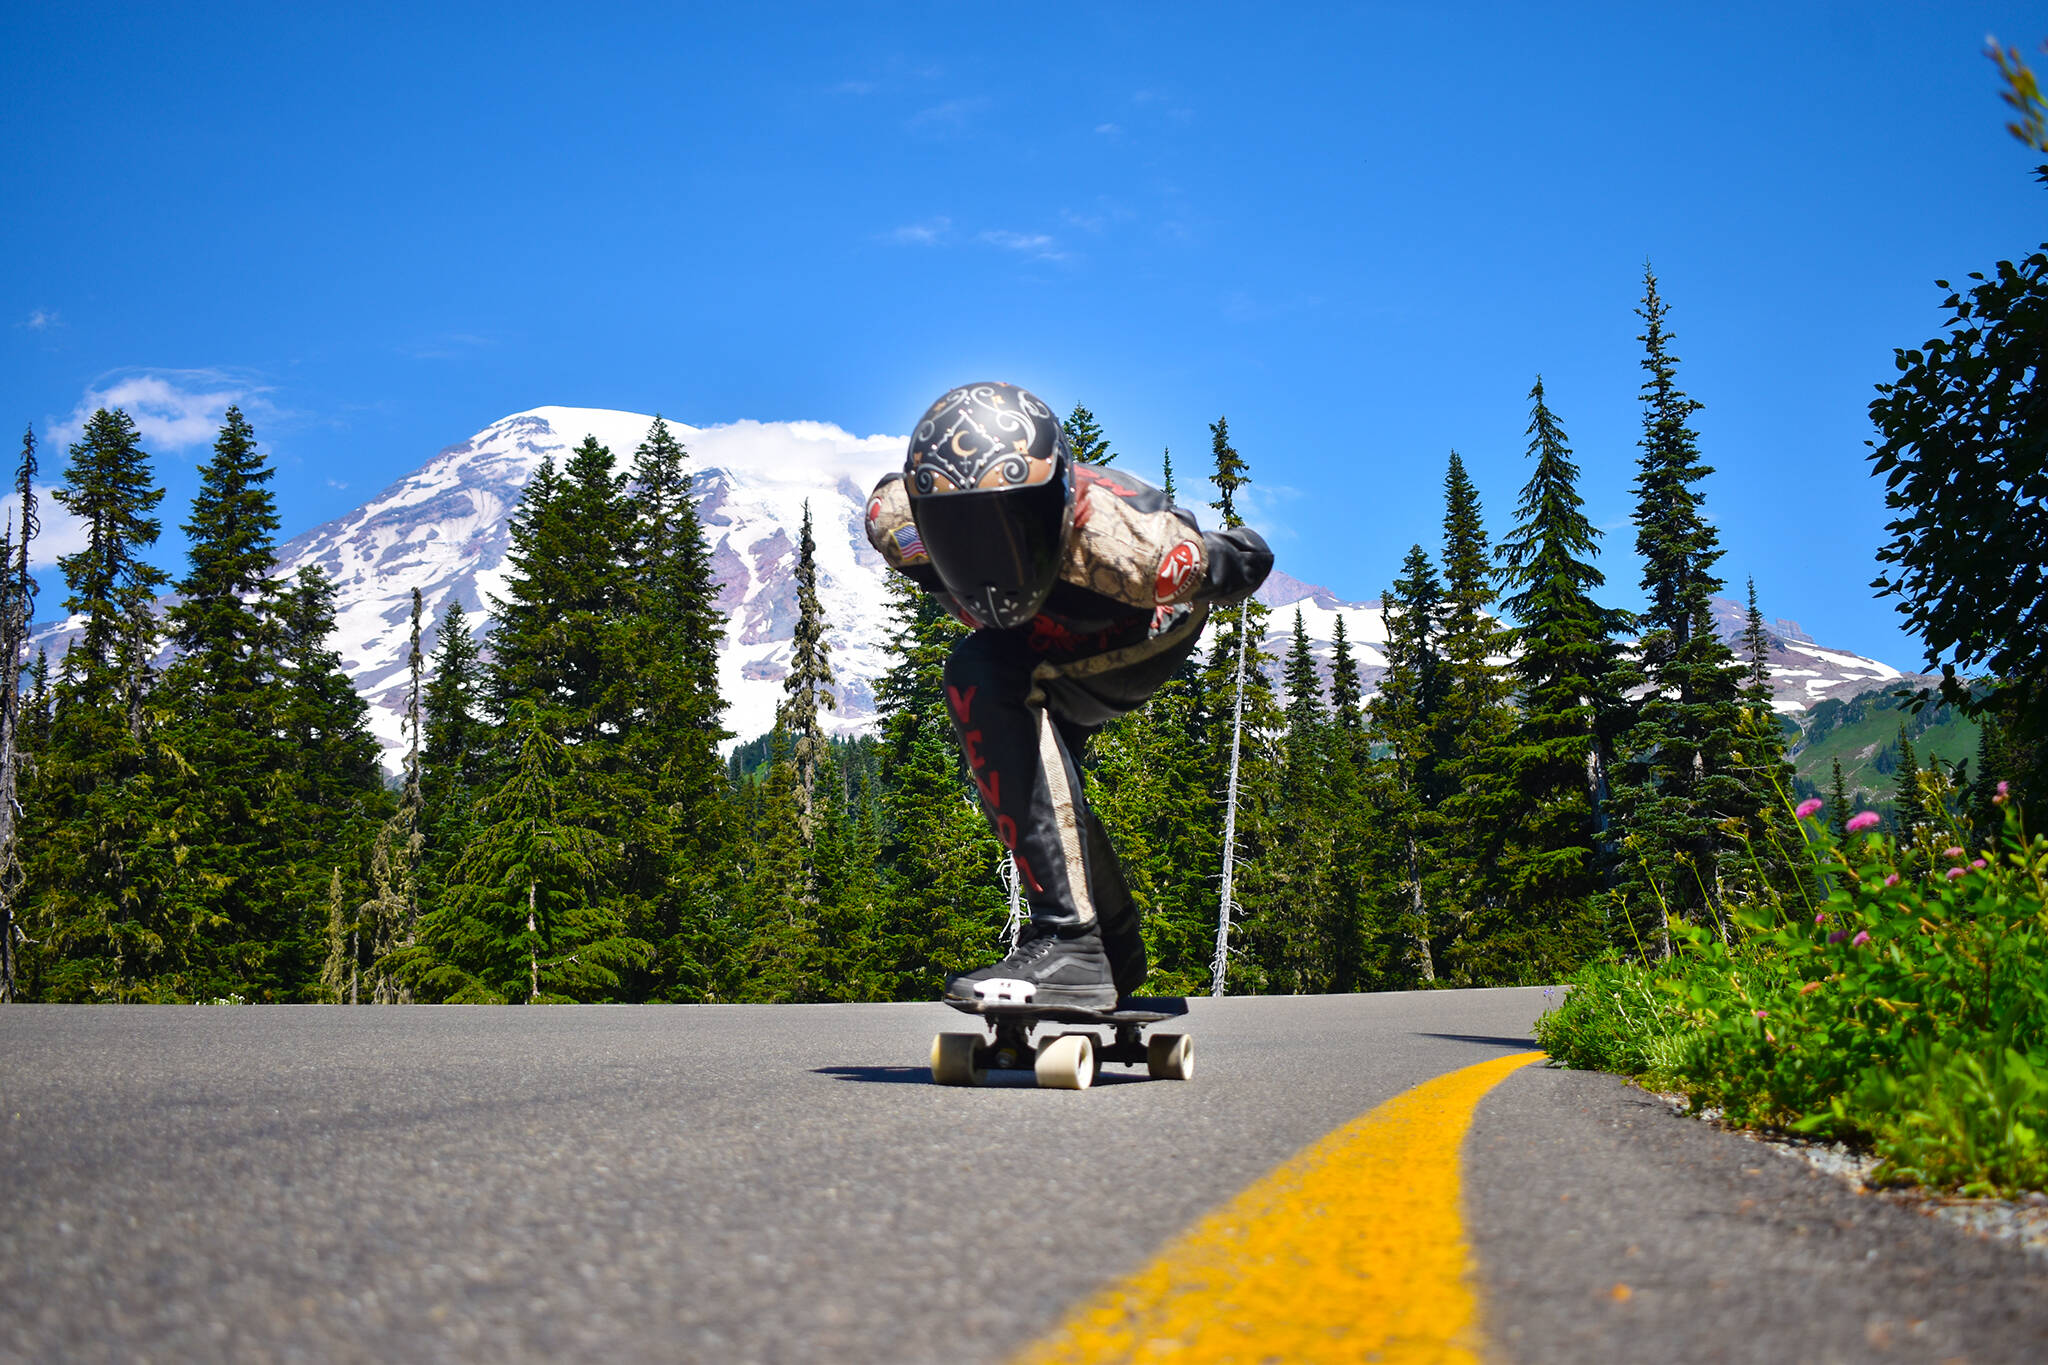 Local skateboarders like Marcie Morgan sometimes train in the Mount Rainier National Park area. When skaters like Morgan go out to practice, they start by scoping out the road – learning how it twists and turns, clearing obstacles like gravel or branches. Low-traffic, one-way roads are ideal and worth taking long drives, she said. Despite your best efforts, you will fall, like Morgan did at a recent qualifier race in Vermont. “I’m fine,” she said: “I banged up my knee a little, but as we say in this sport, if you’re not falling, you’re not learning.” Photo by Alex Bruell.